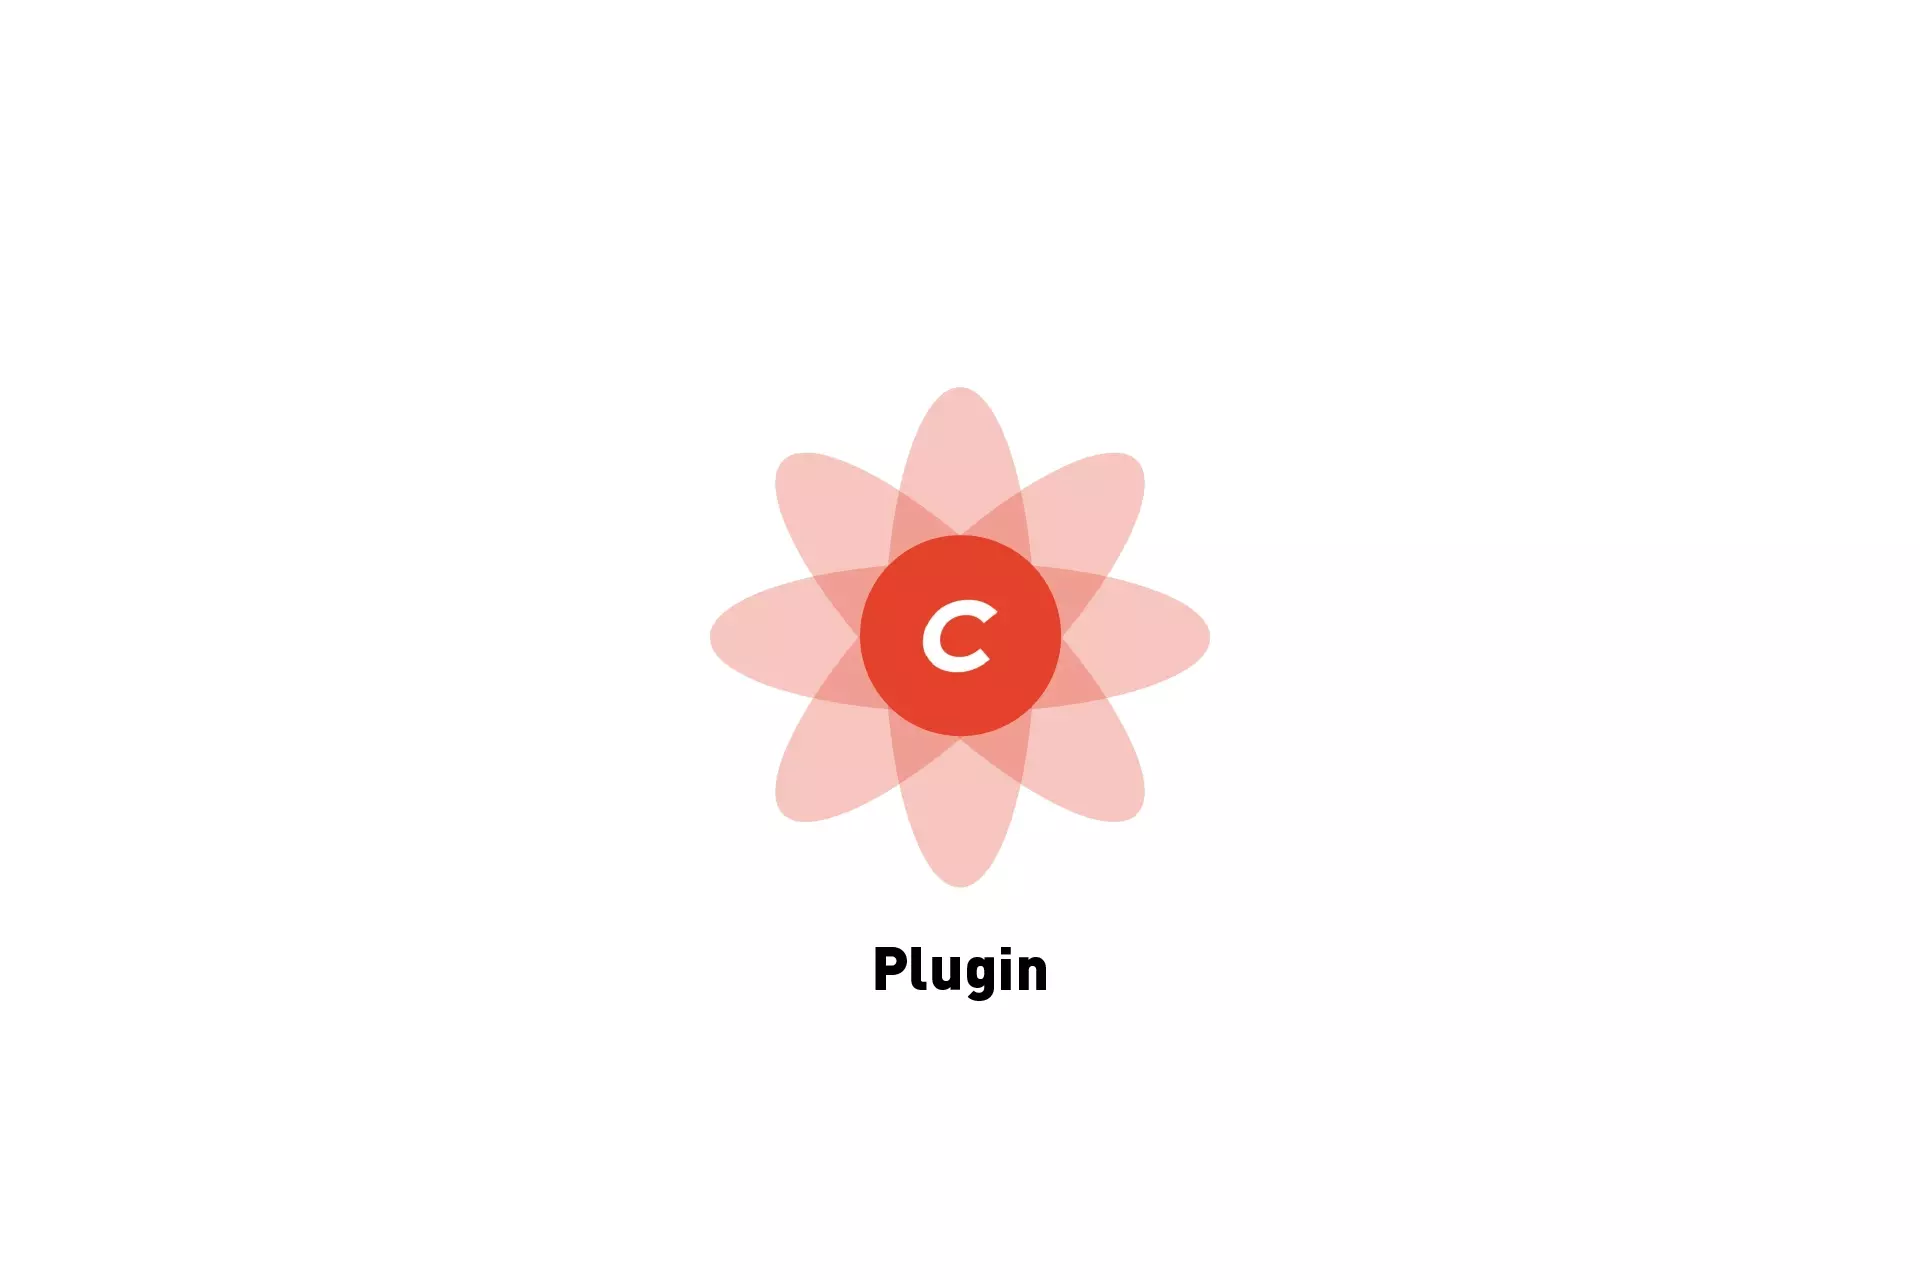 A flower that represents Craft CMS. Beneath it sits the text “Plugin.”